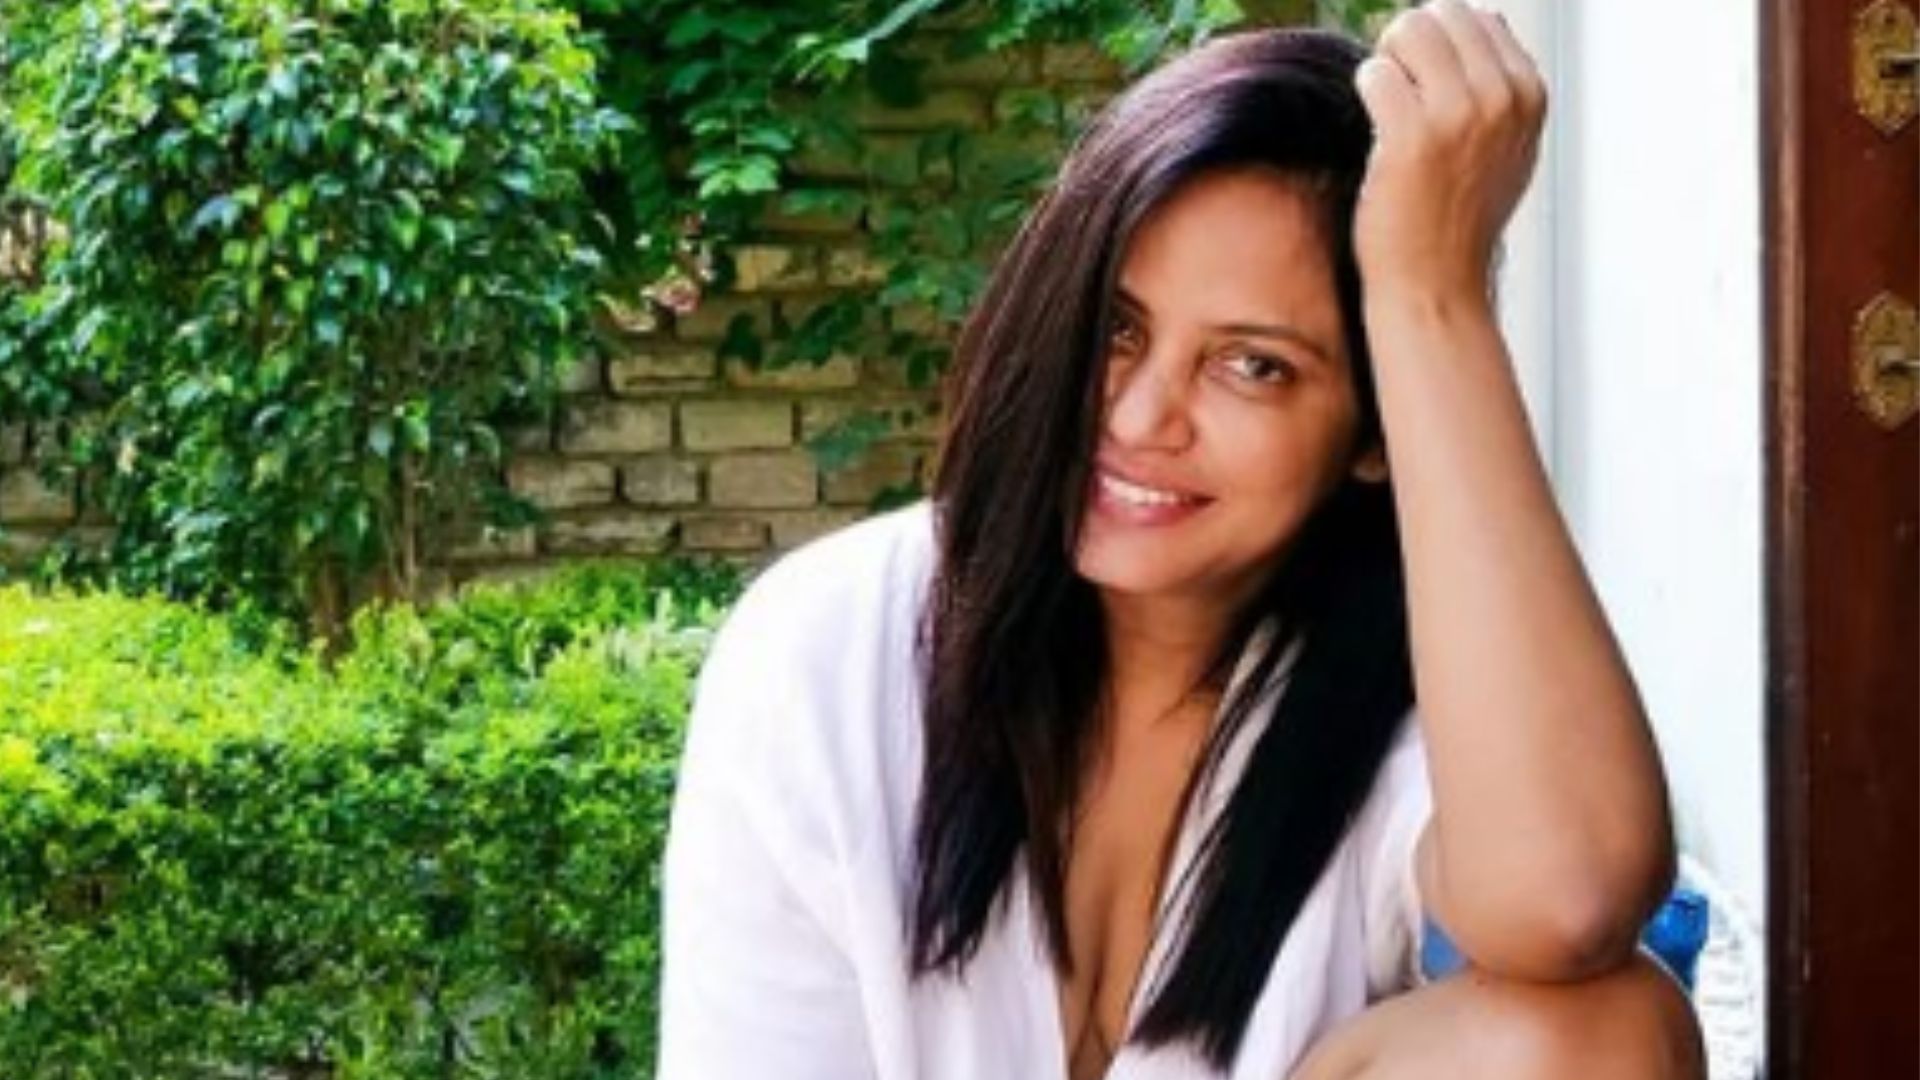 Actor Neetu Chandra Reveals A “Big Businessman” Offered Her To Become His Salaried Wife